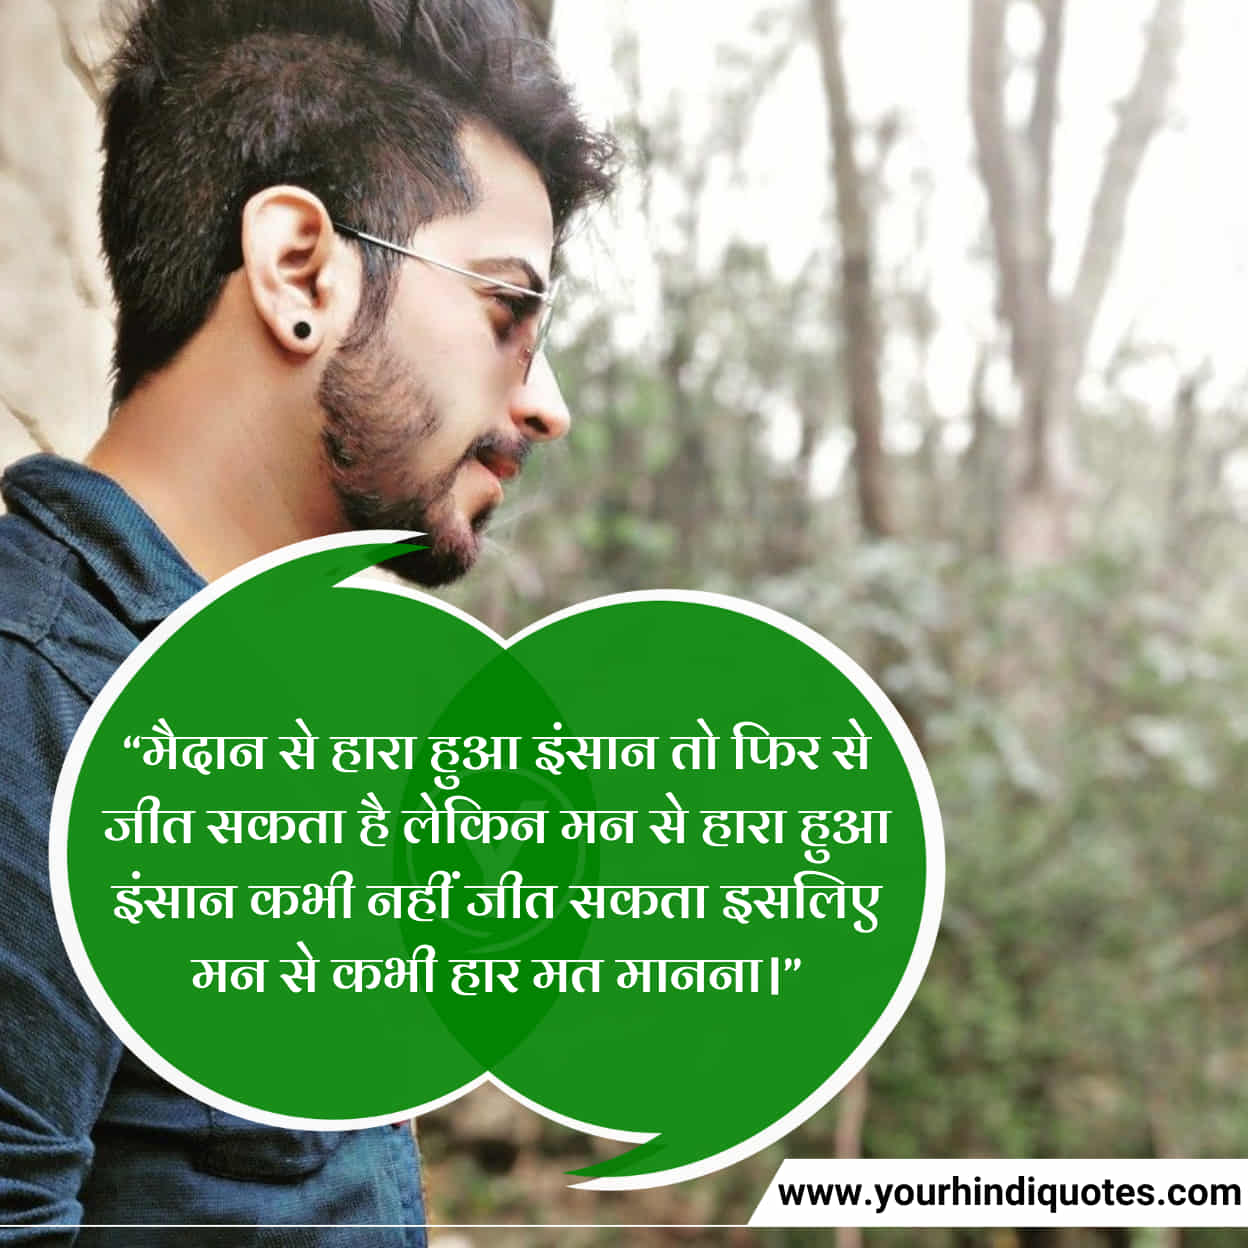 Hindi Quotes For Motivation